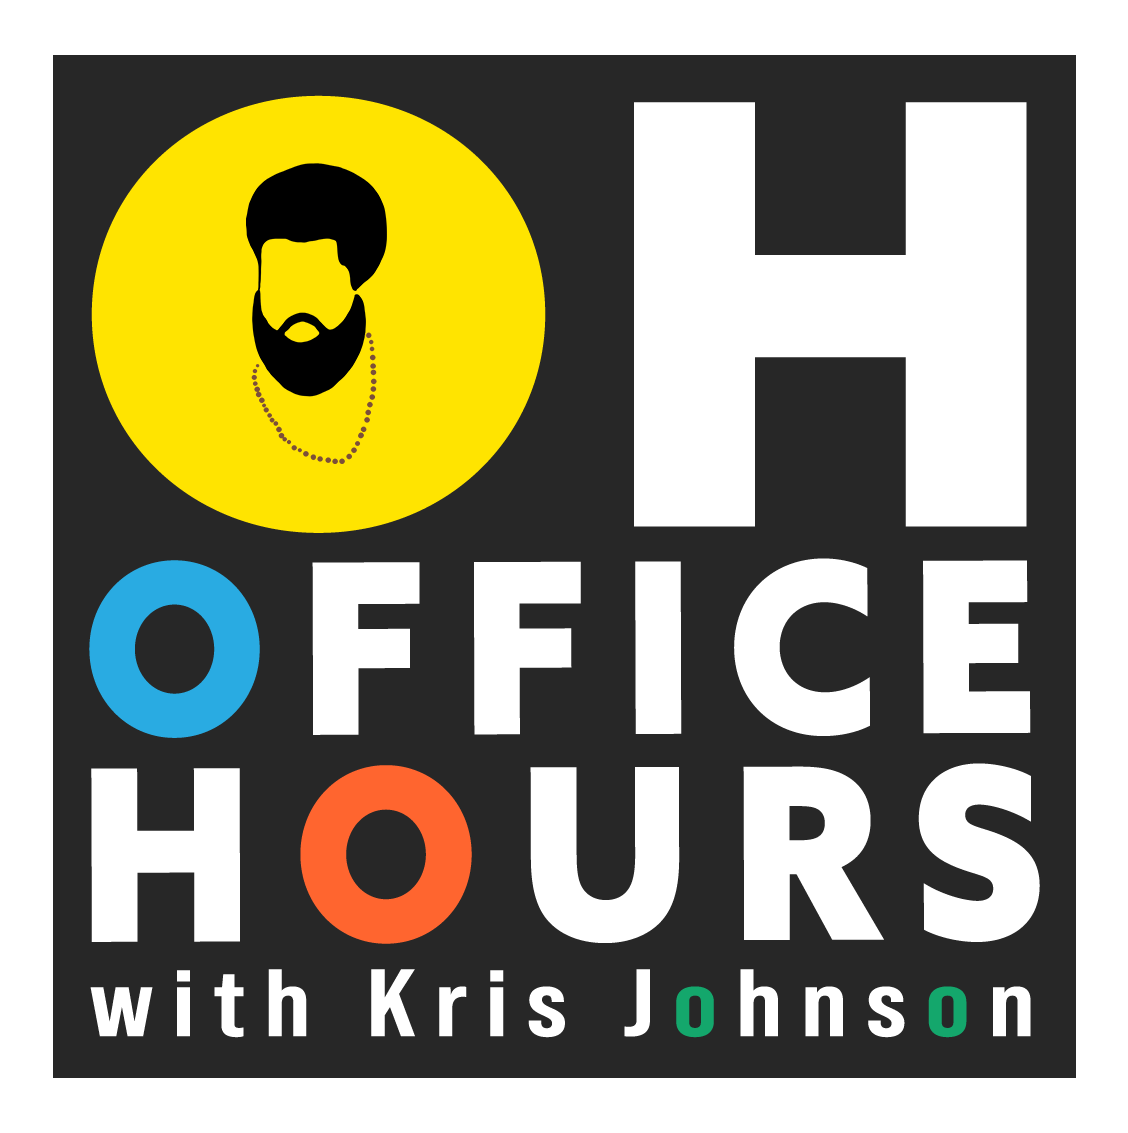 Office Hours with Kris Johnson